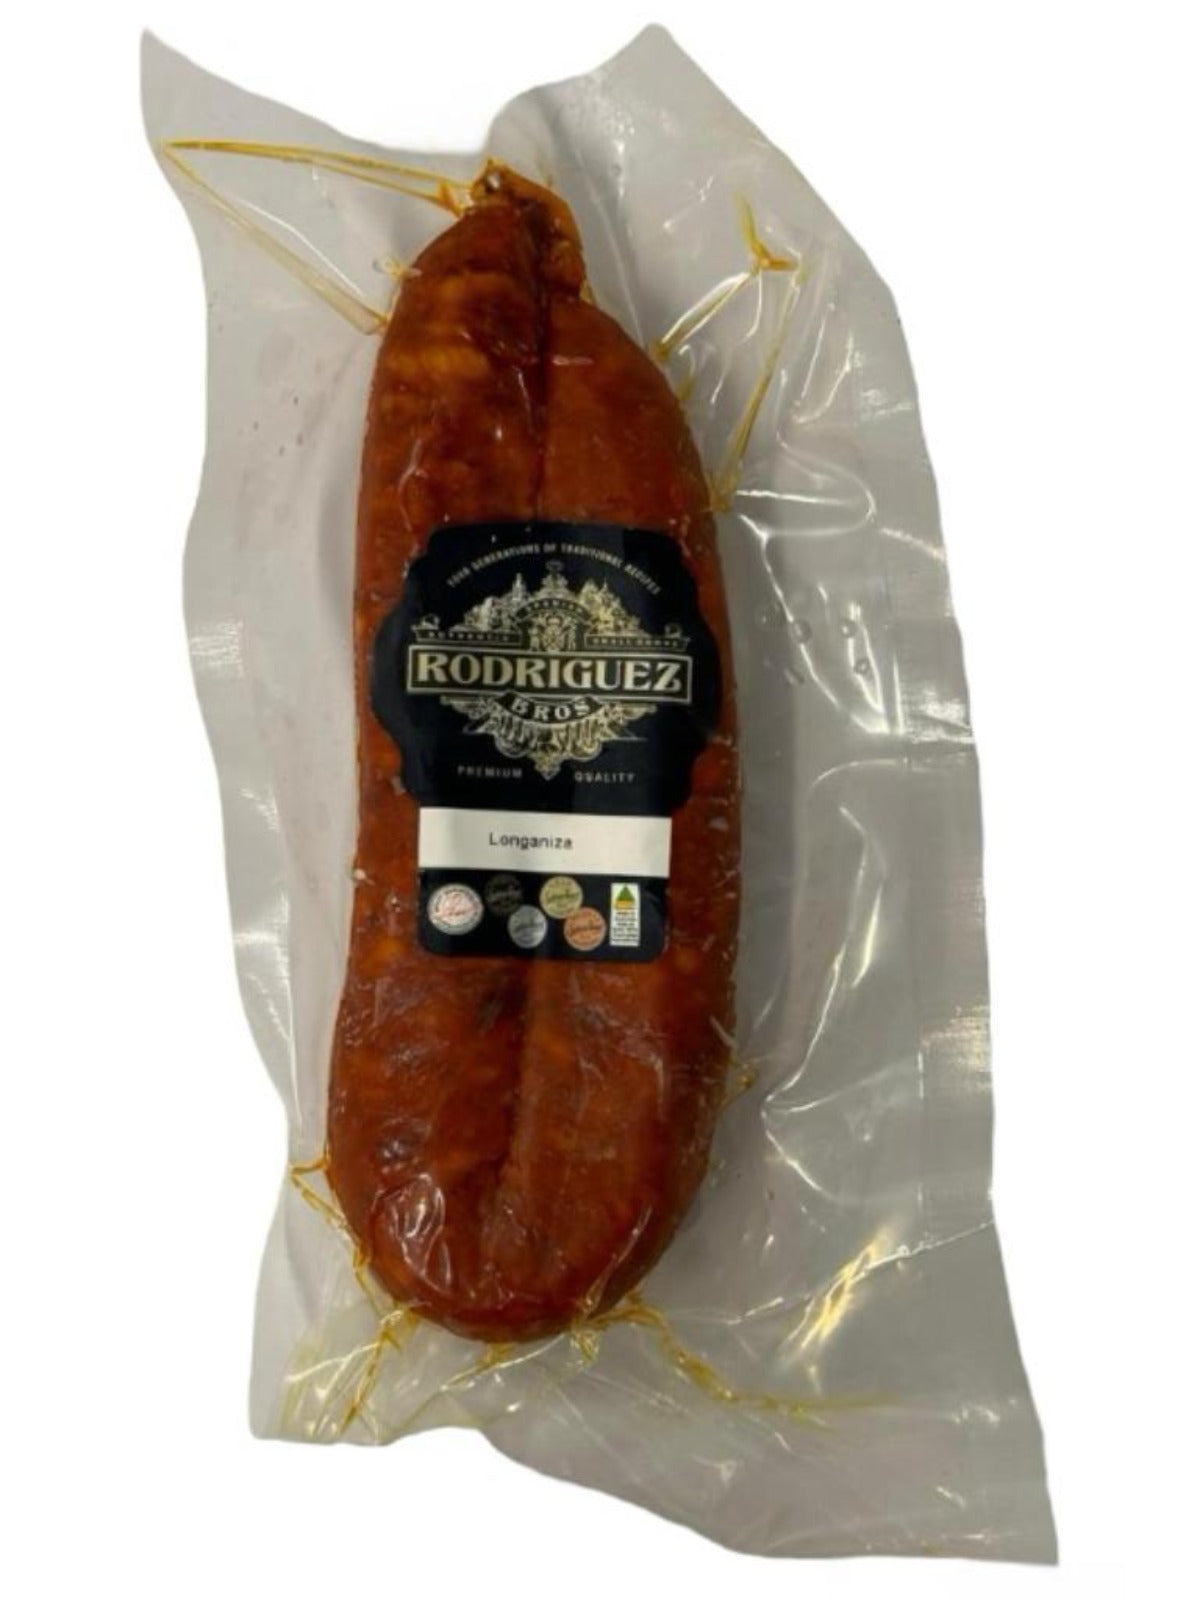 Mild Longaniza single piece pack. Approx 285g random weight packet. Regular price $10.00 AUD [You are guaranteed to receive at least 275g of product, equivalent price of $36.36 per kg.]